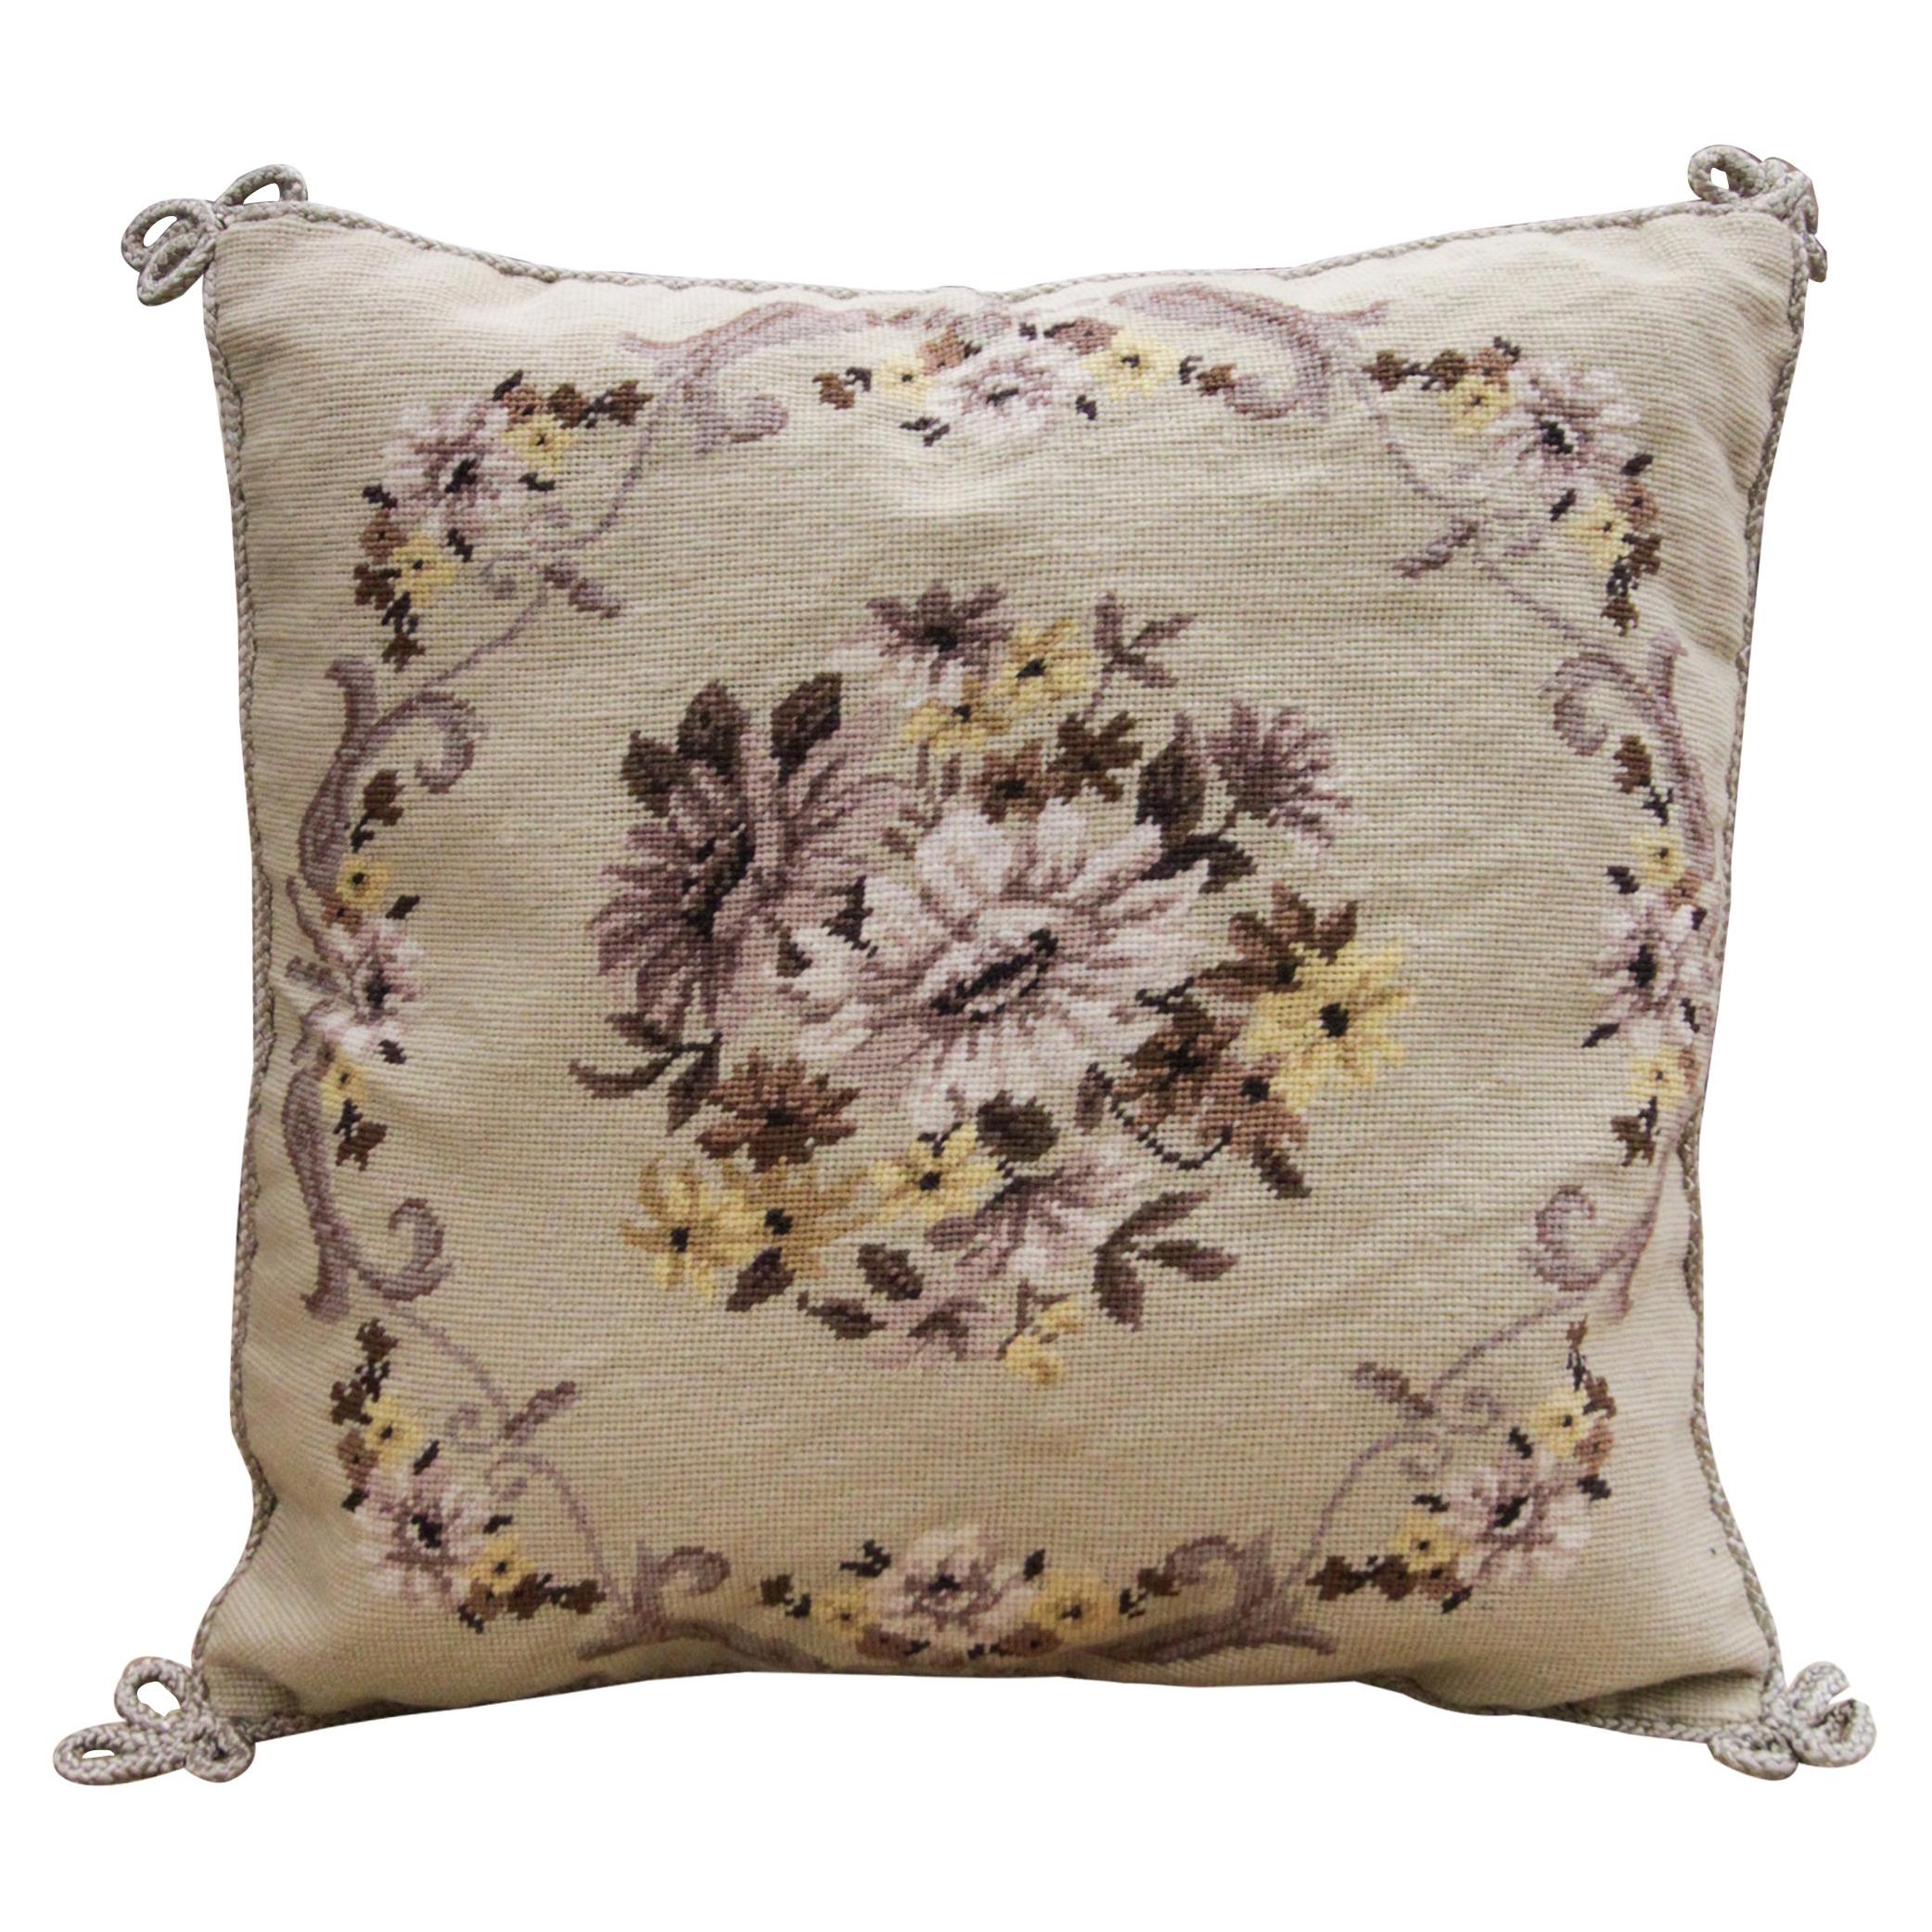 Floral Handmade Cushion Cover, Needlepoint Cream Purple Wool Scatter Cushion